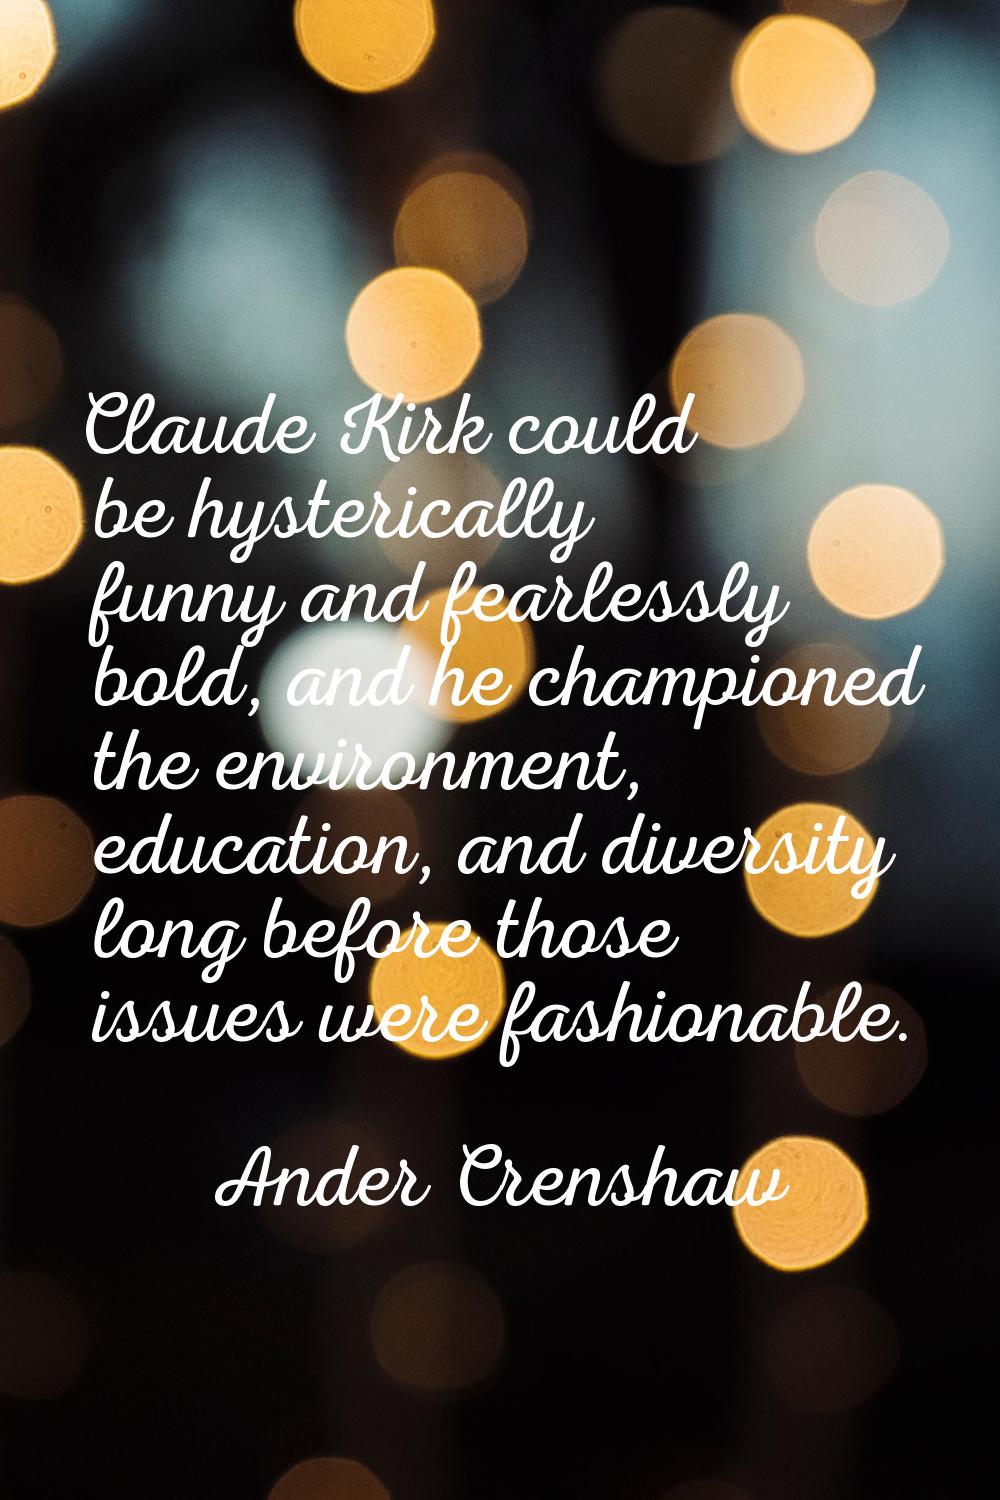 Claude Kirk could be hysterically funny and fearlessly bold, and he championed the environment, edu